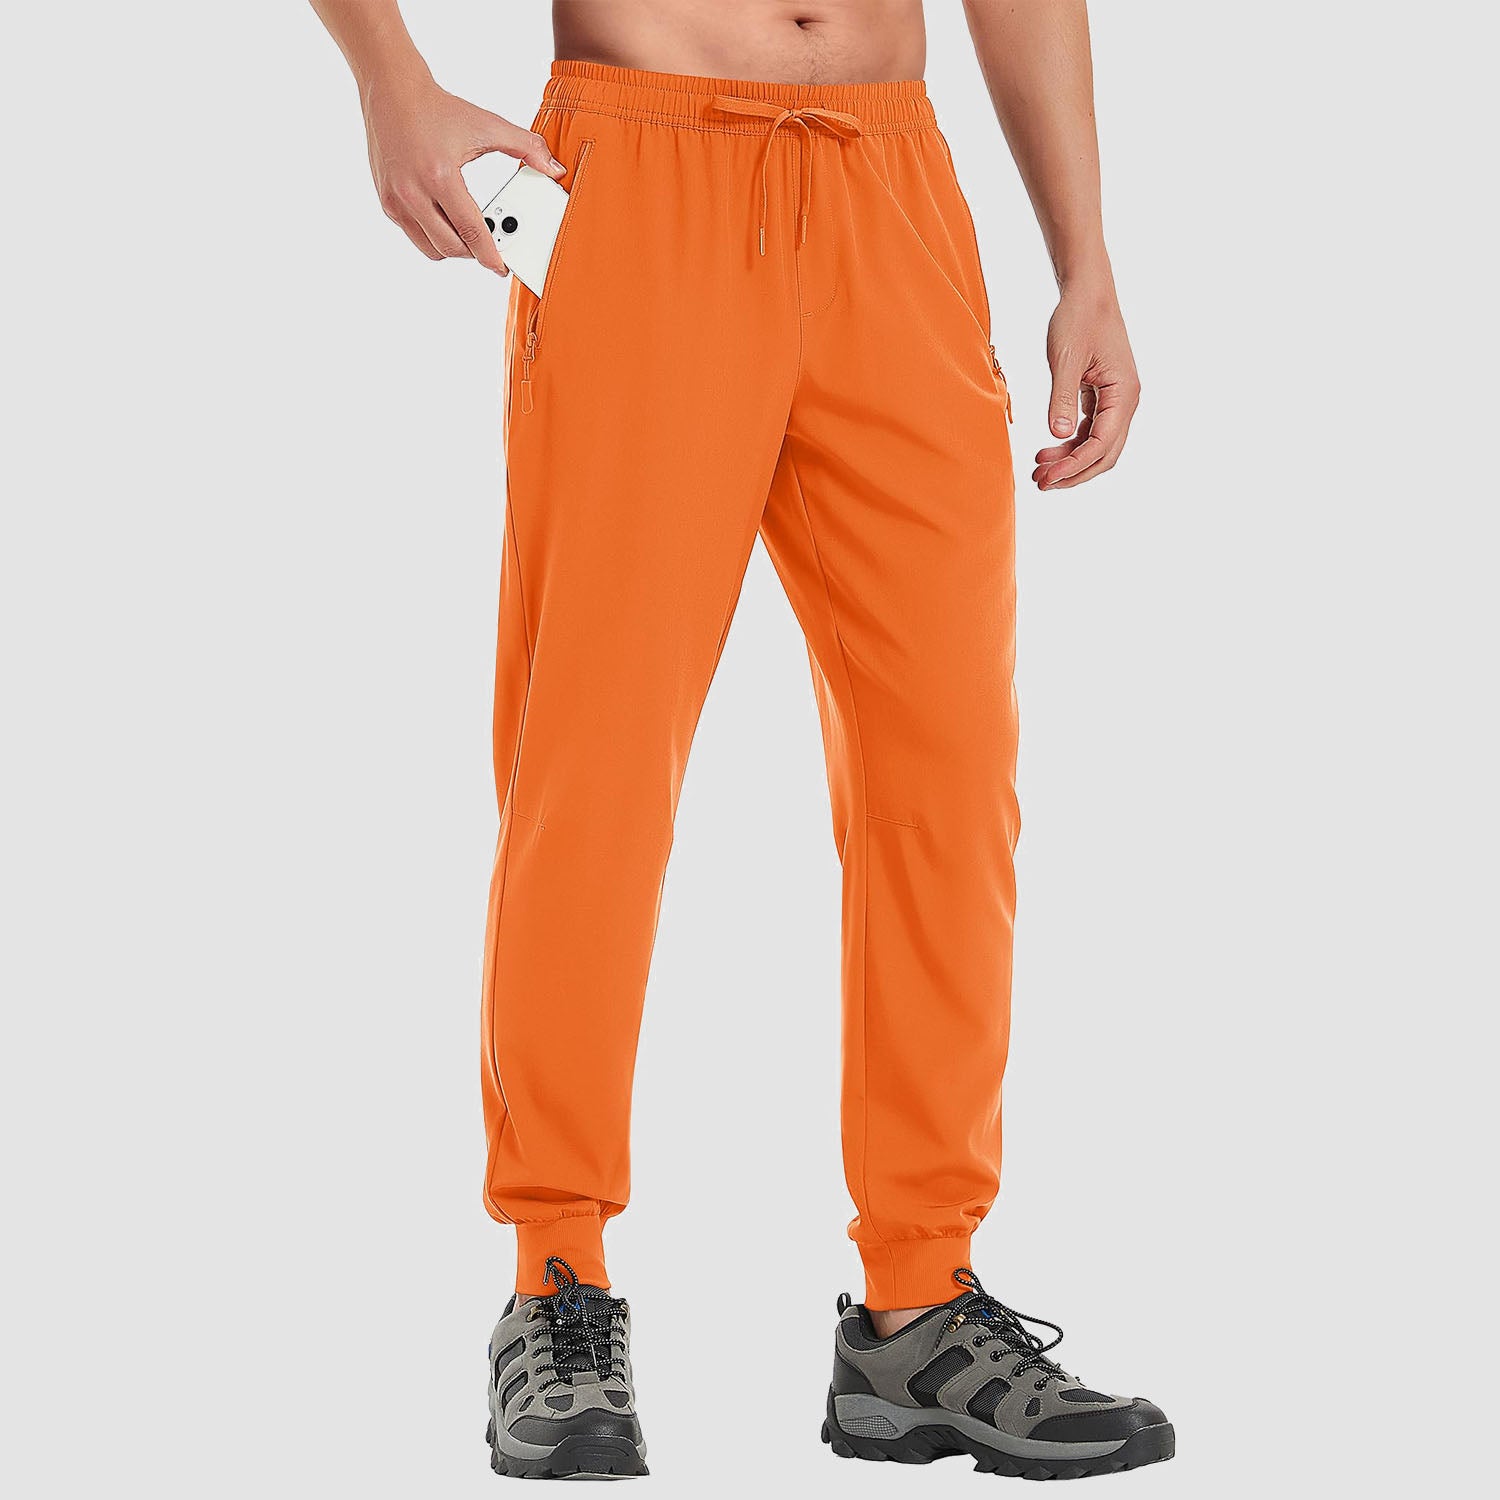 Men's Sweatpants Lightweight Quick Dry Workout Trousers